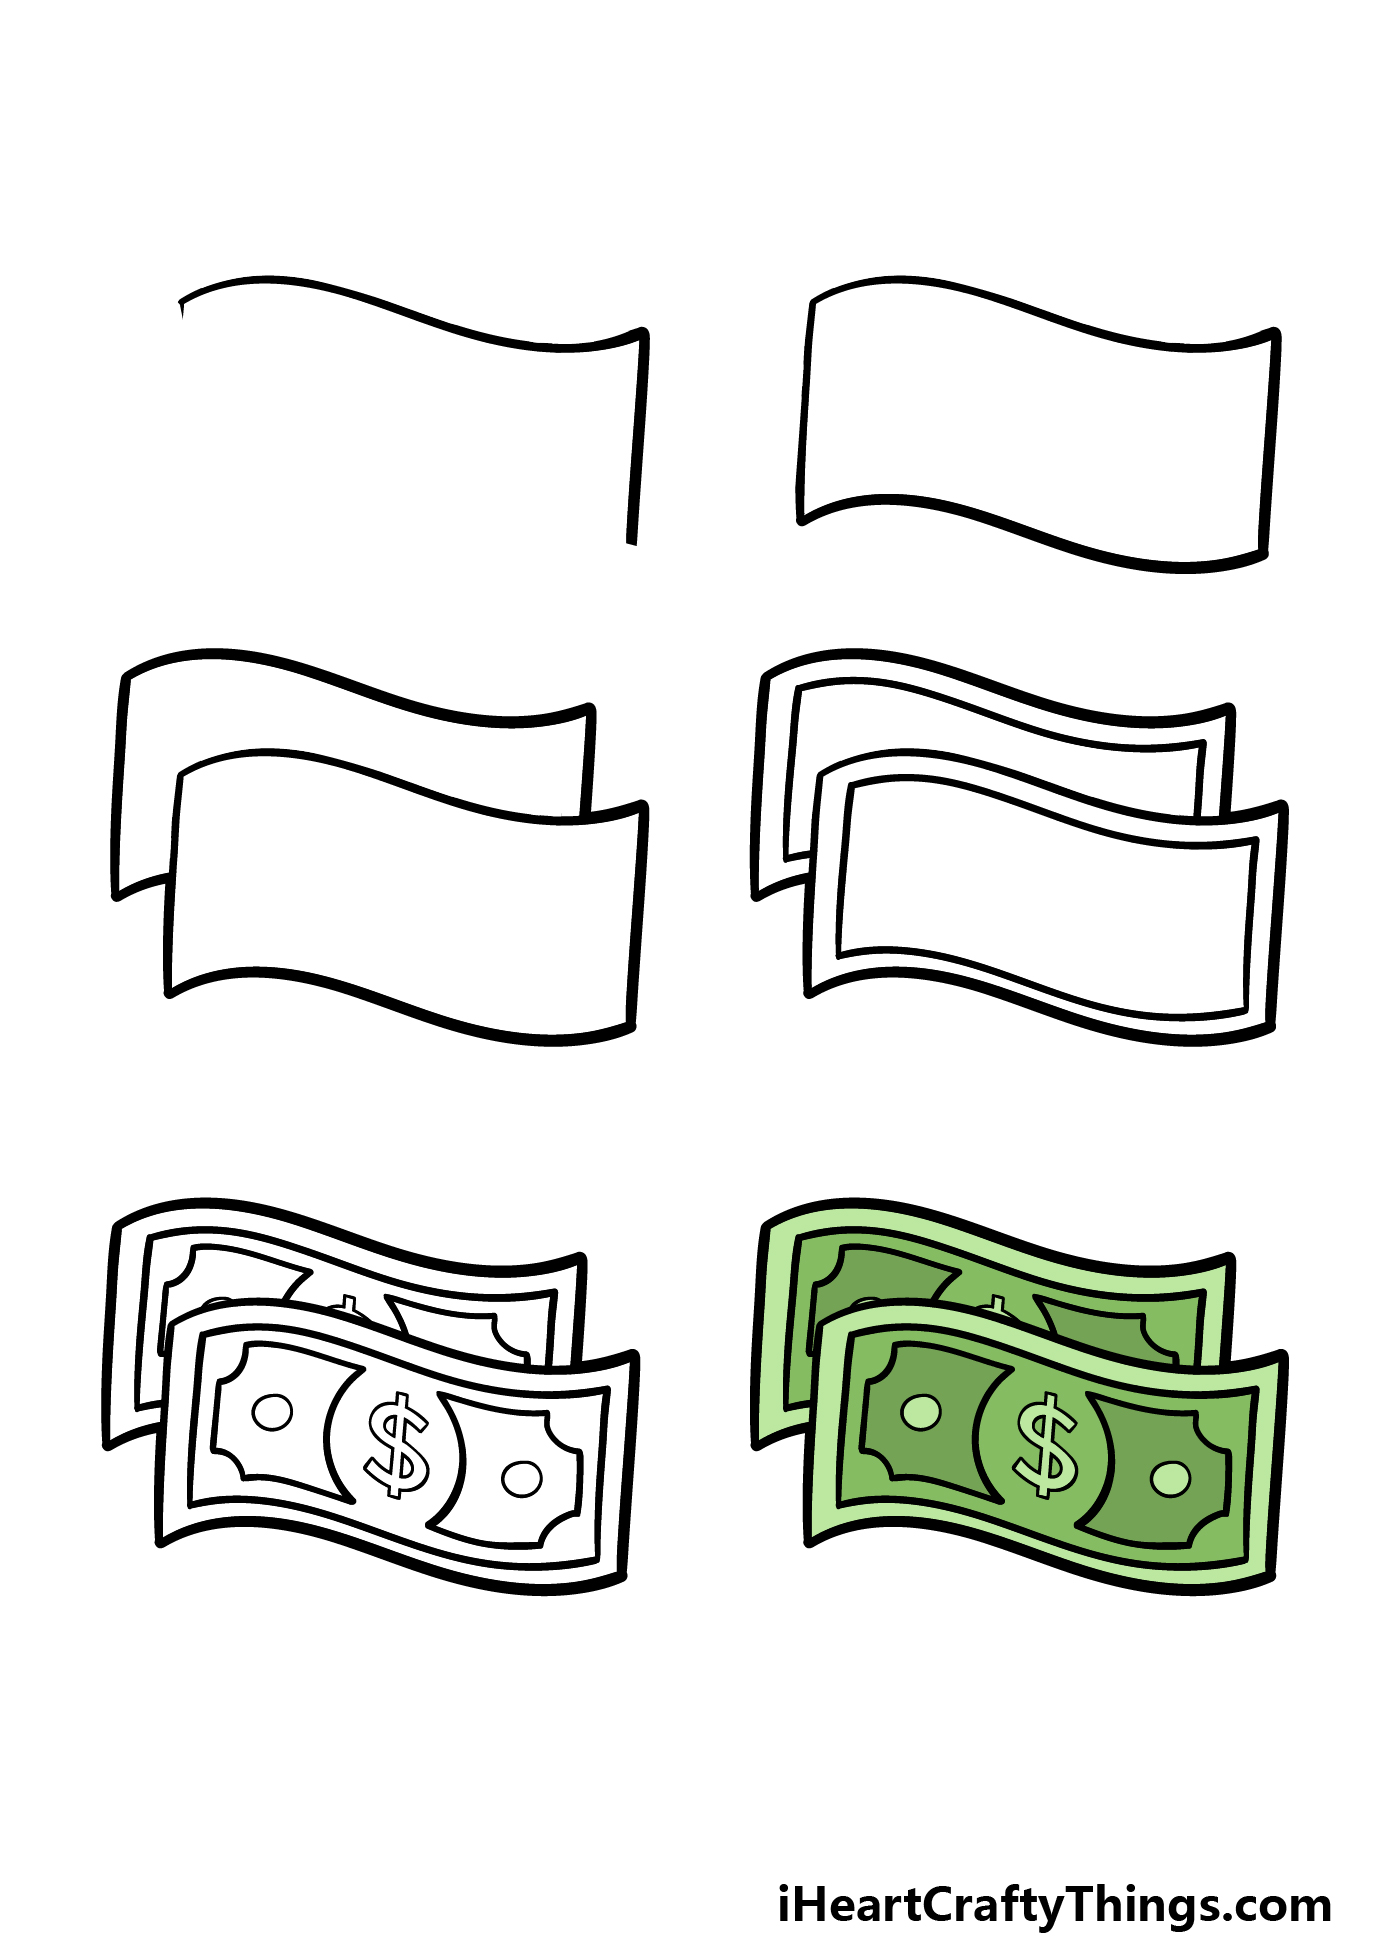 how to draw cartoon money in 6 steps